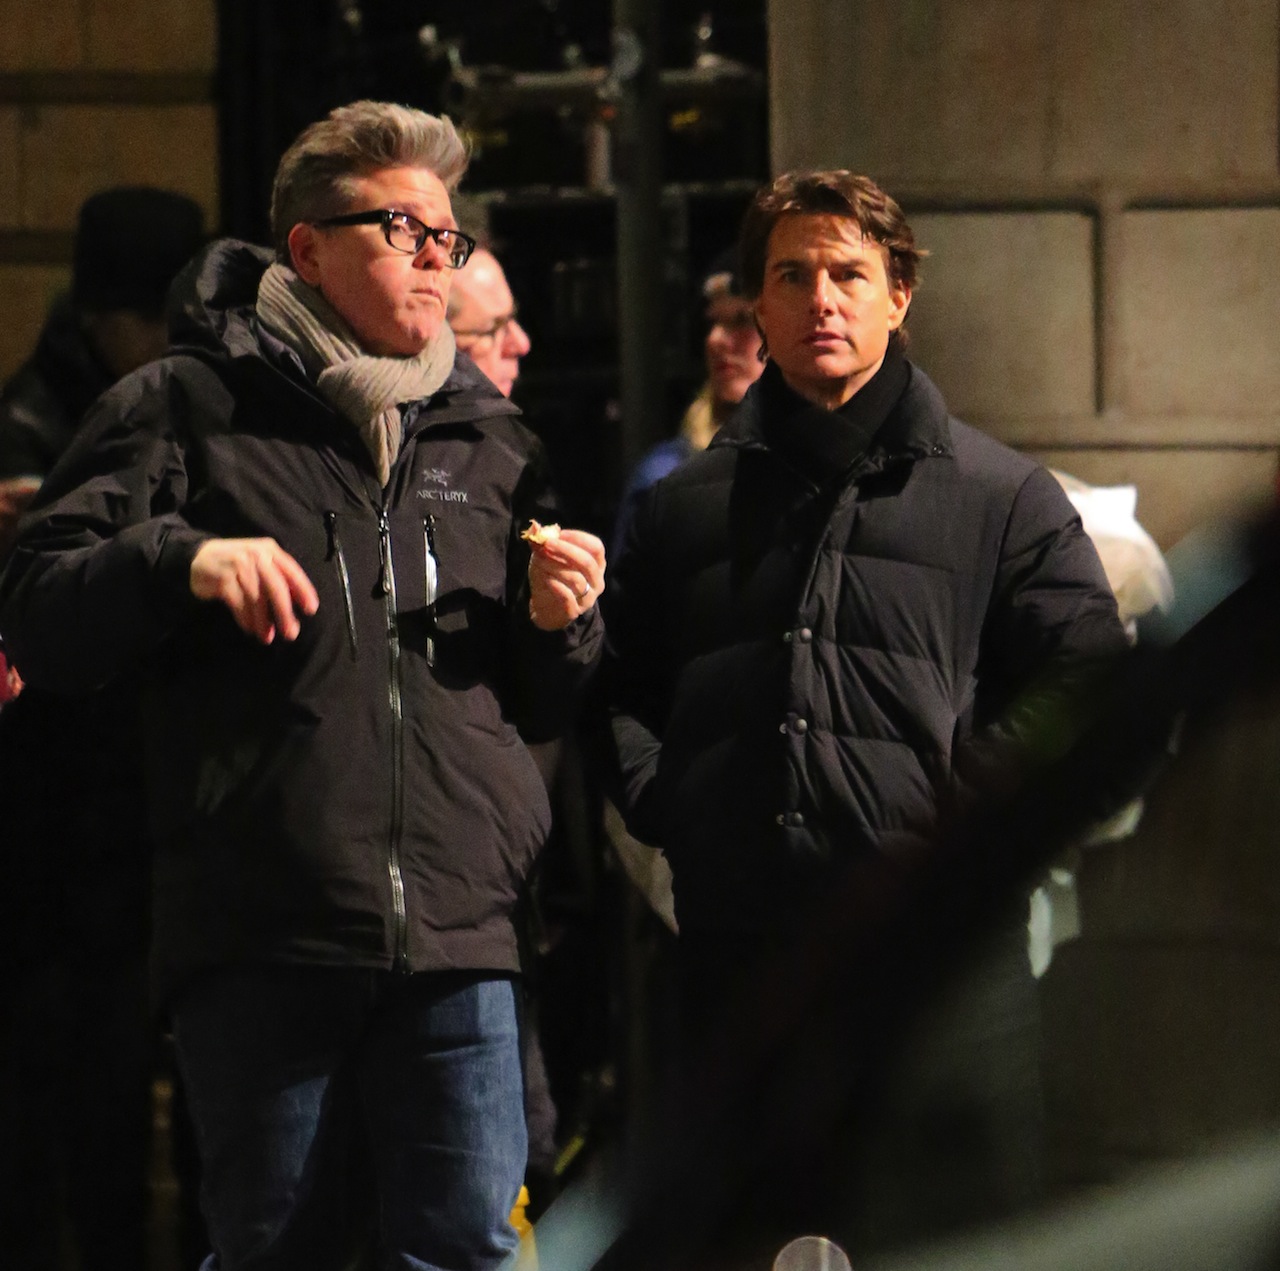 Tom Cruise films scenes for 'Mission: Impossible 5' in London

Featuring: Tom Cruise
Where: London, United Kingdom
When: 21 Feb 2015
Credit: WENN.com